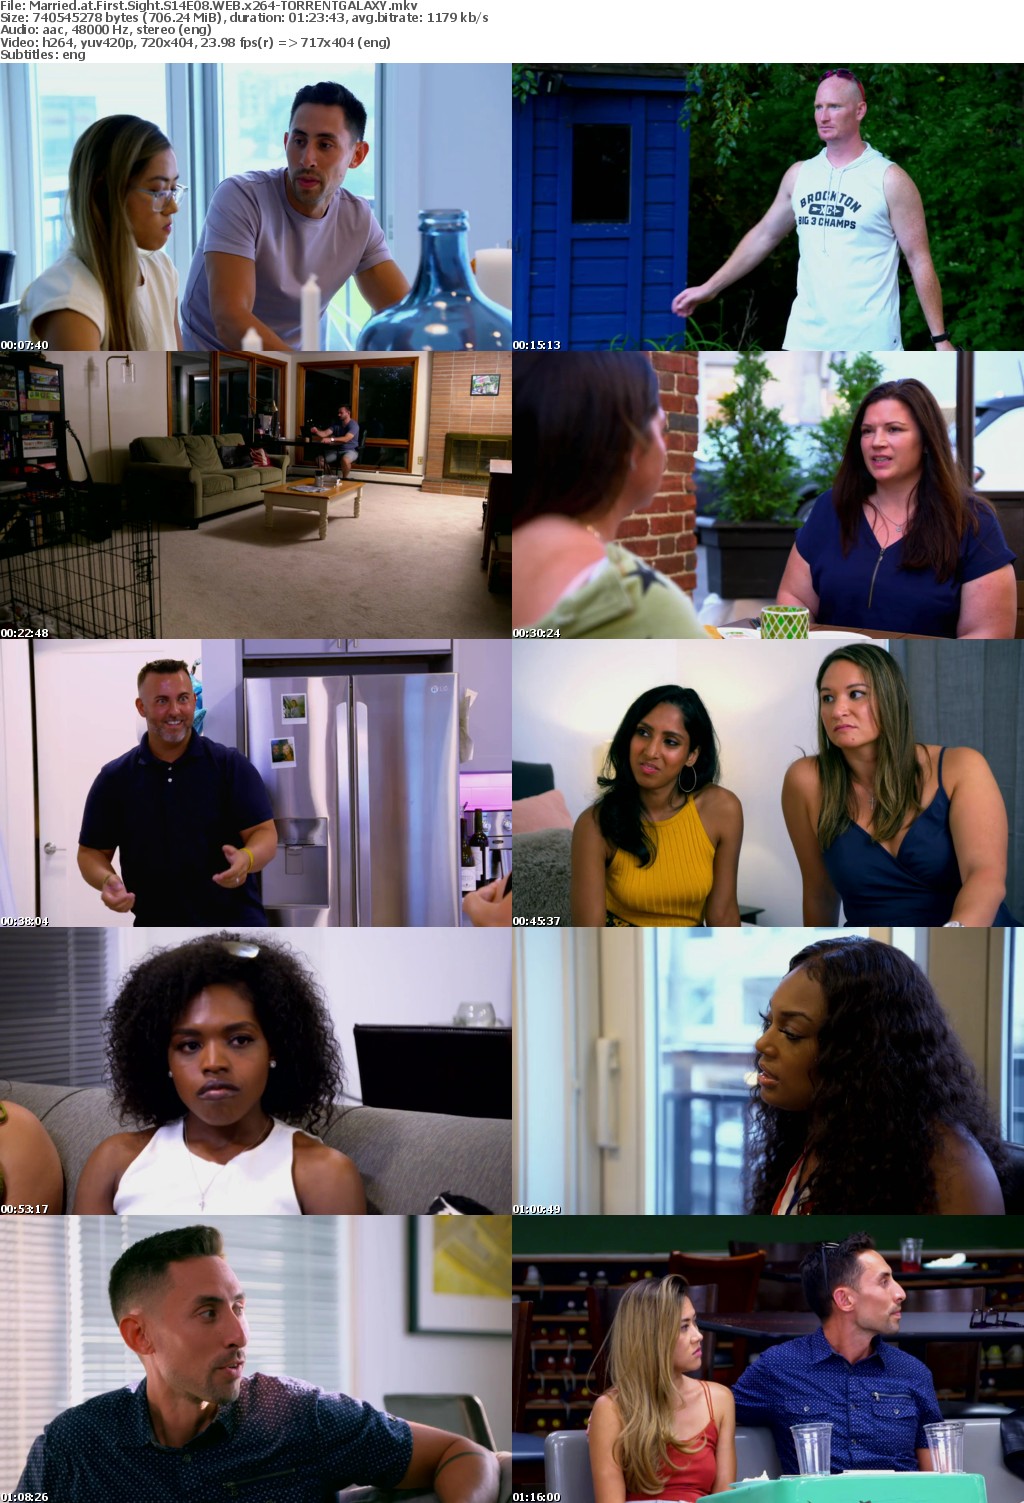 Married at First Sight S14E08 WEB x264-GALAXY